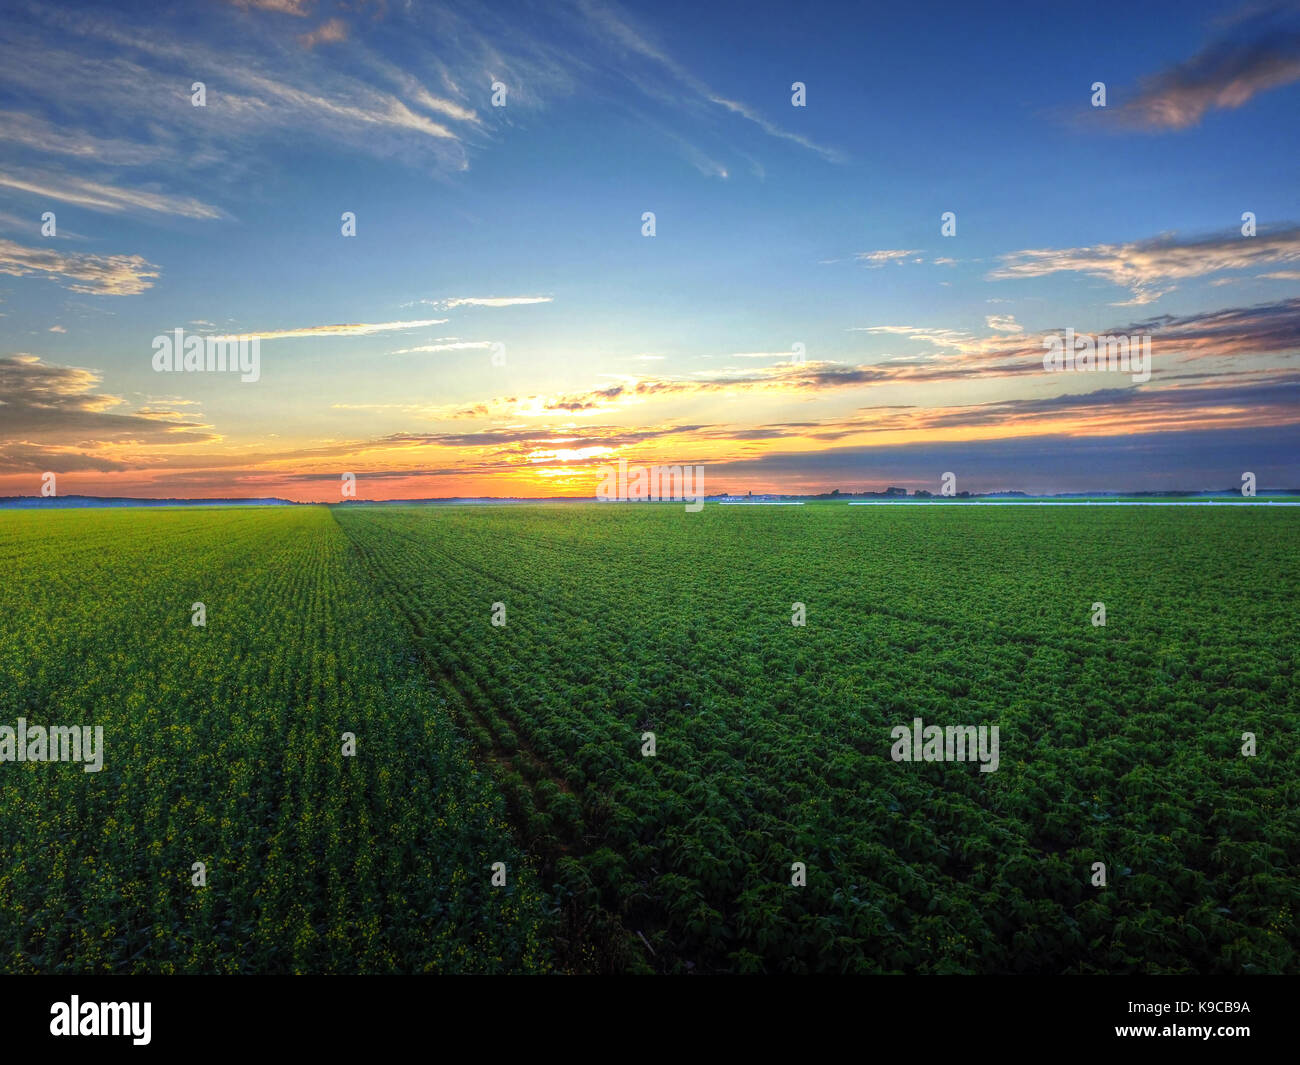 Aerial view of sunset over canola and soybean field Stock Photo